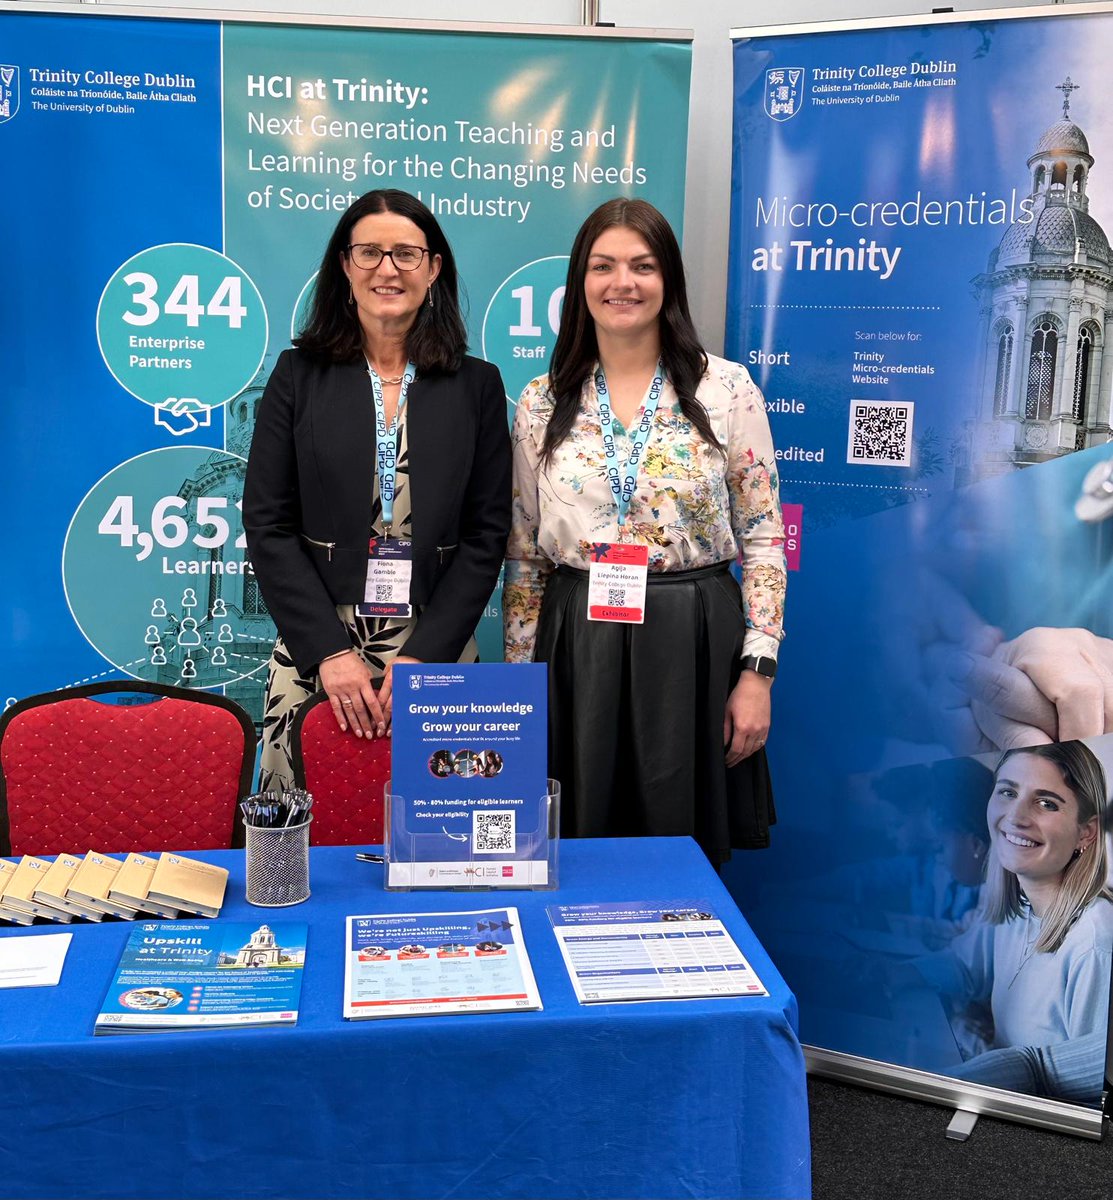 Connect with the Trinity Enterprise Engagement and @tcddublin #Microcredentials team at the @cipdireland in @TheRDS today. Drop by our stand to learn more about our learning options to support your company’s professional development plans. #CIPDIrelandAC